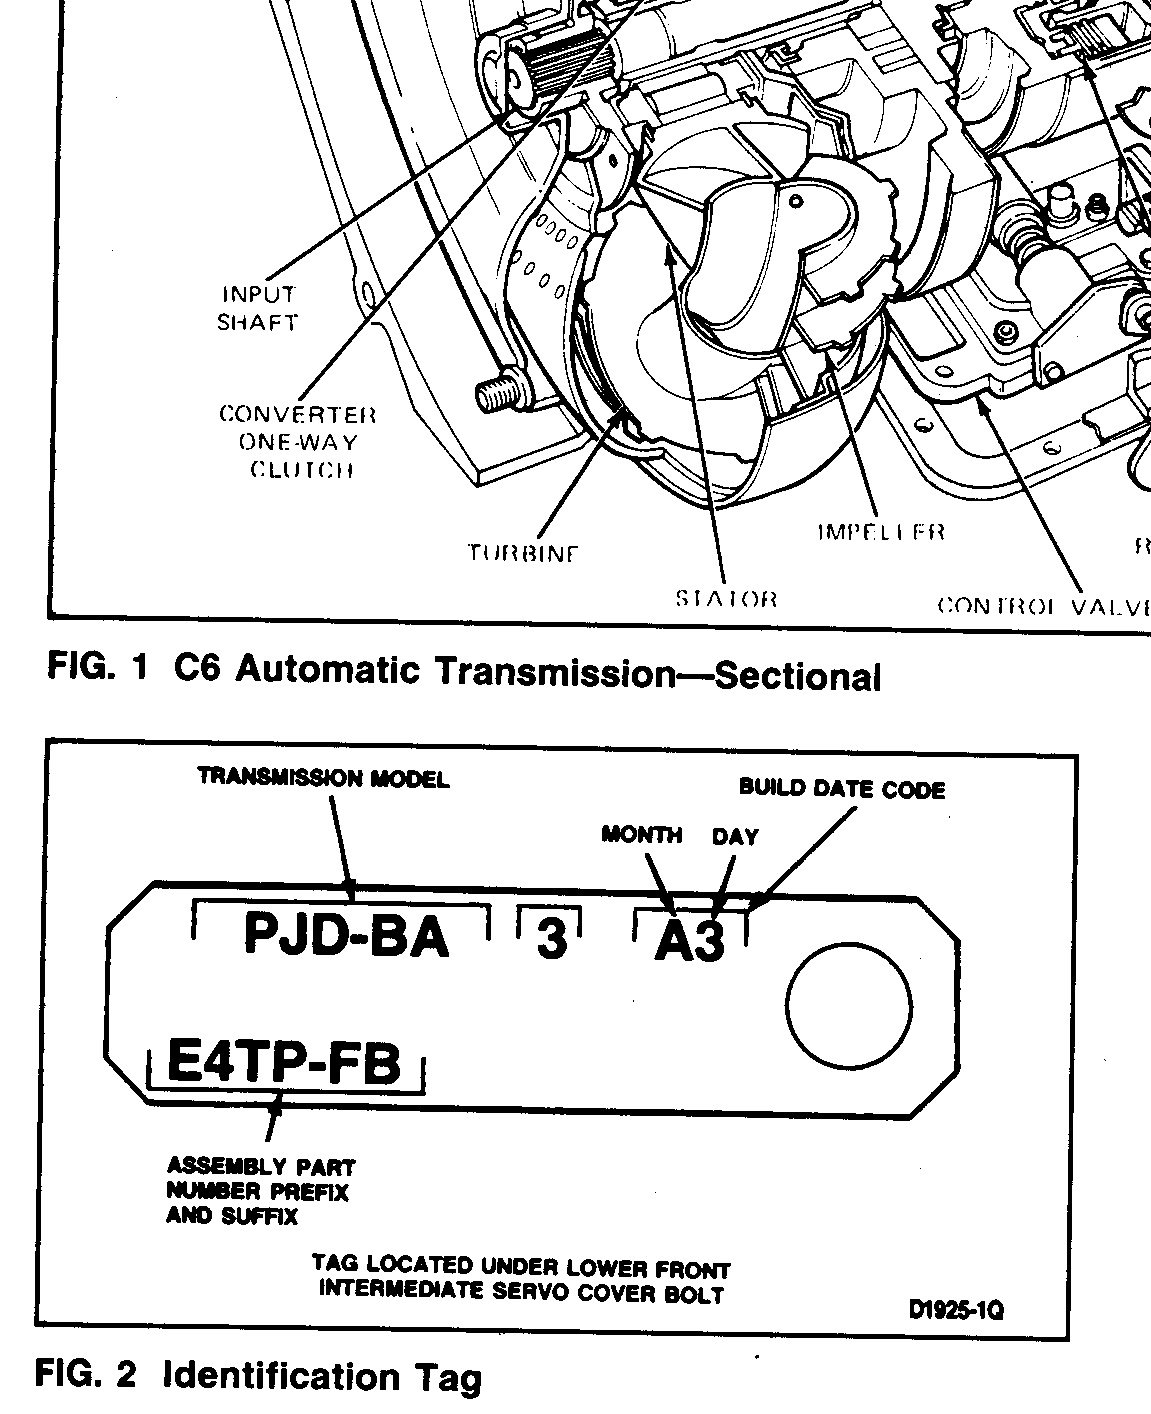 Decoding ford transmission tags #6